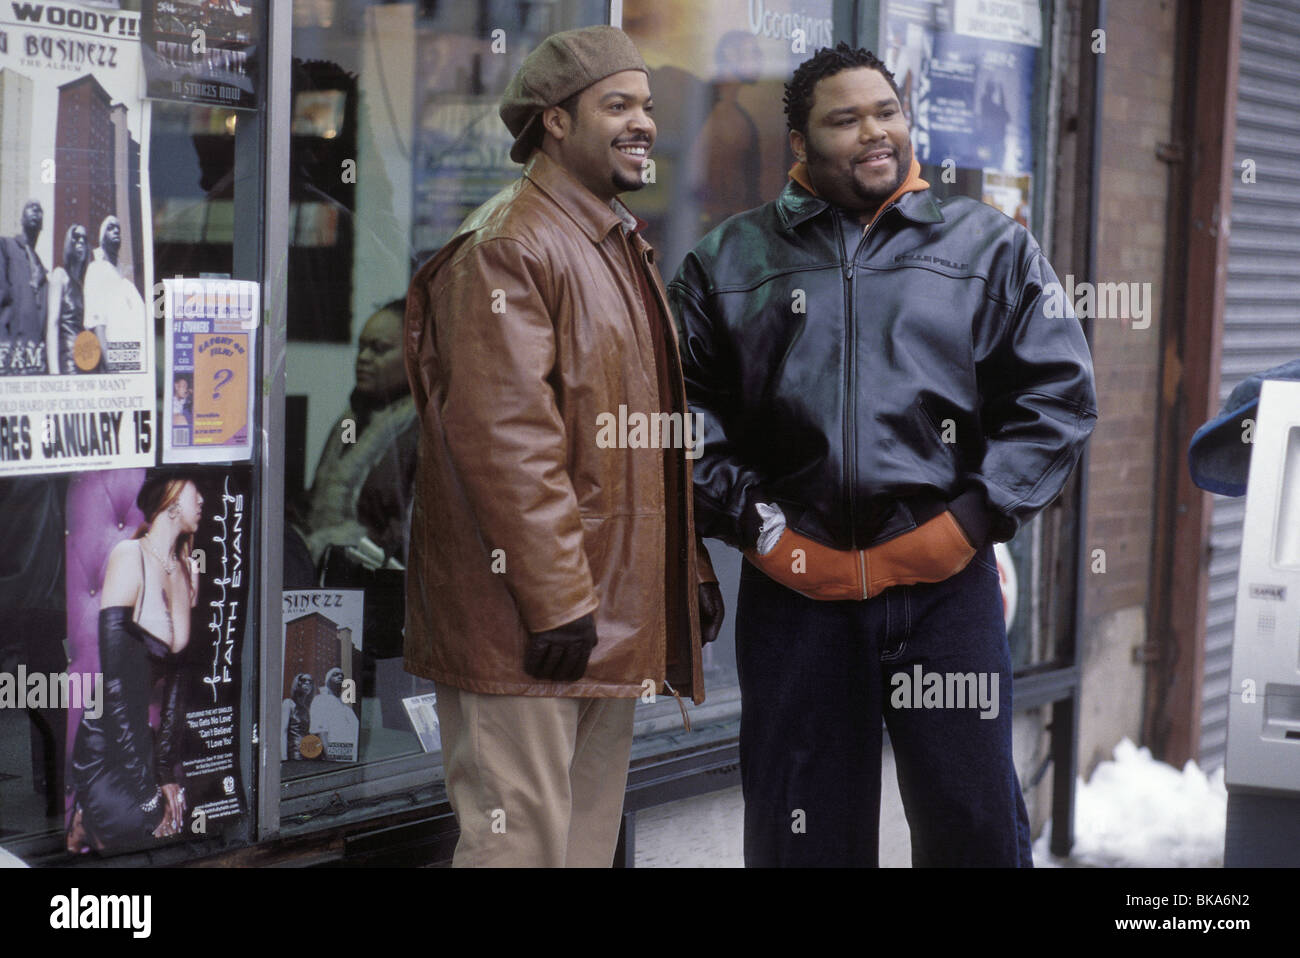 BARBERSHOP (2002) ICE CUBE, ANTHONY ANDERSON BSHP 001 66 Stock Photo